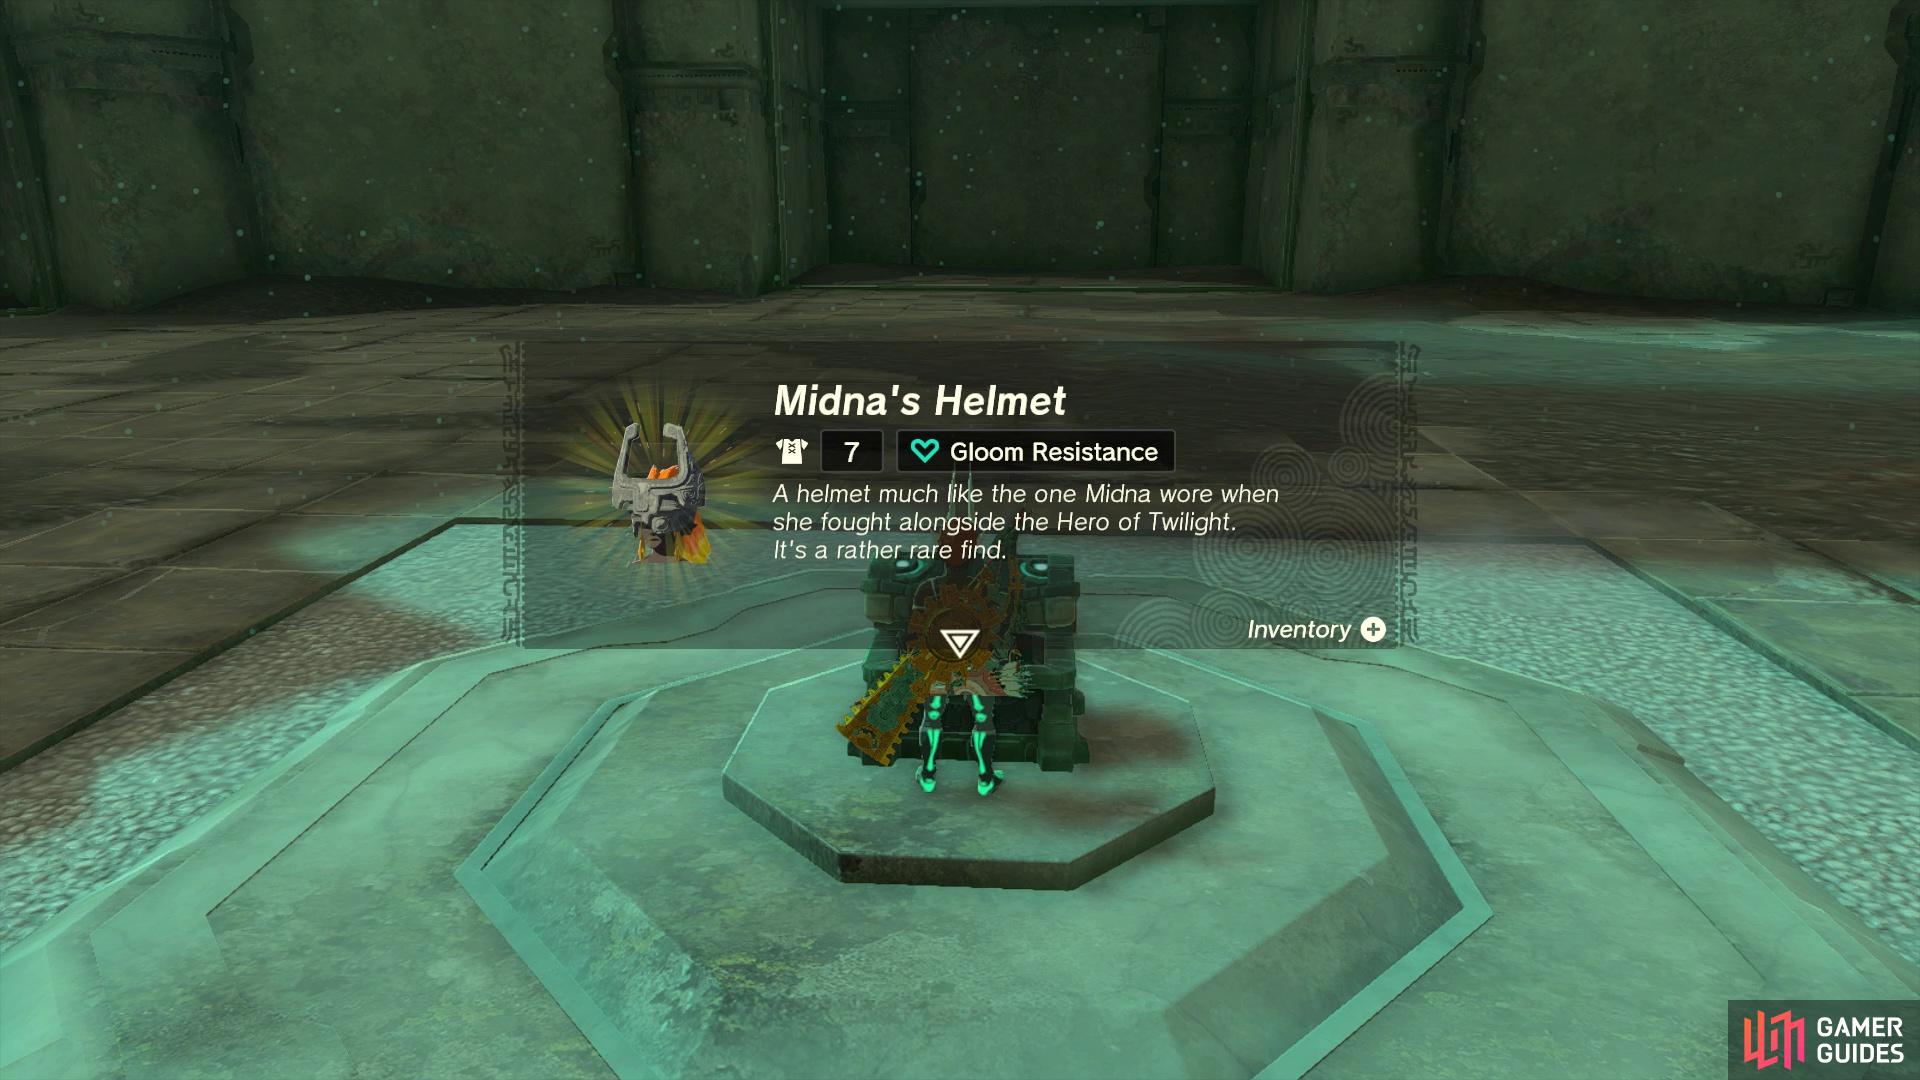 You’ll have to do a little bit of fighting to get Midna’s Helmet